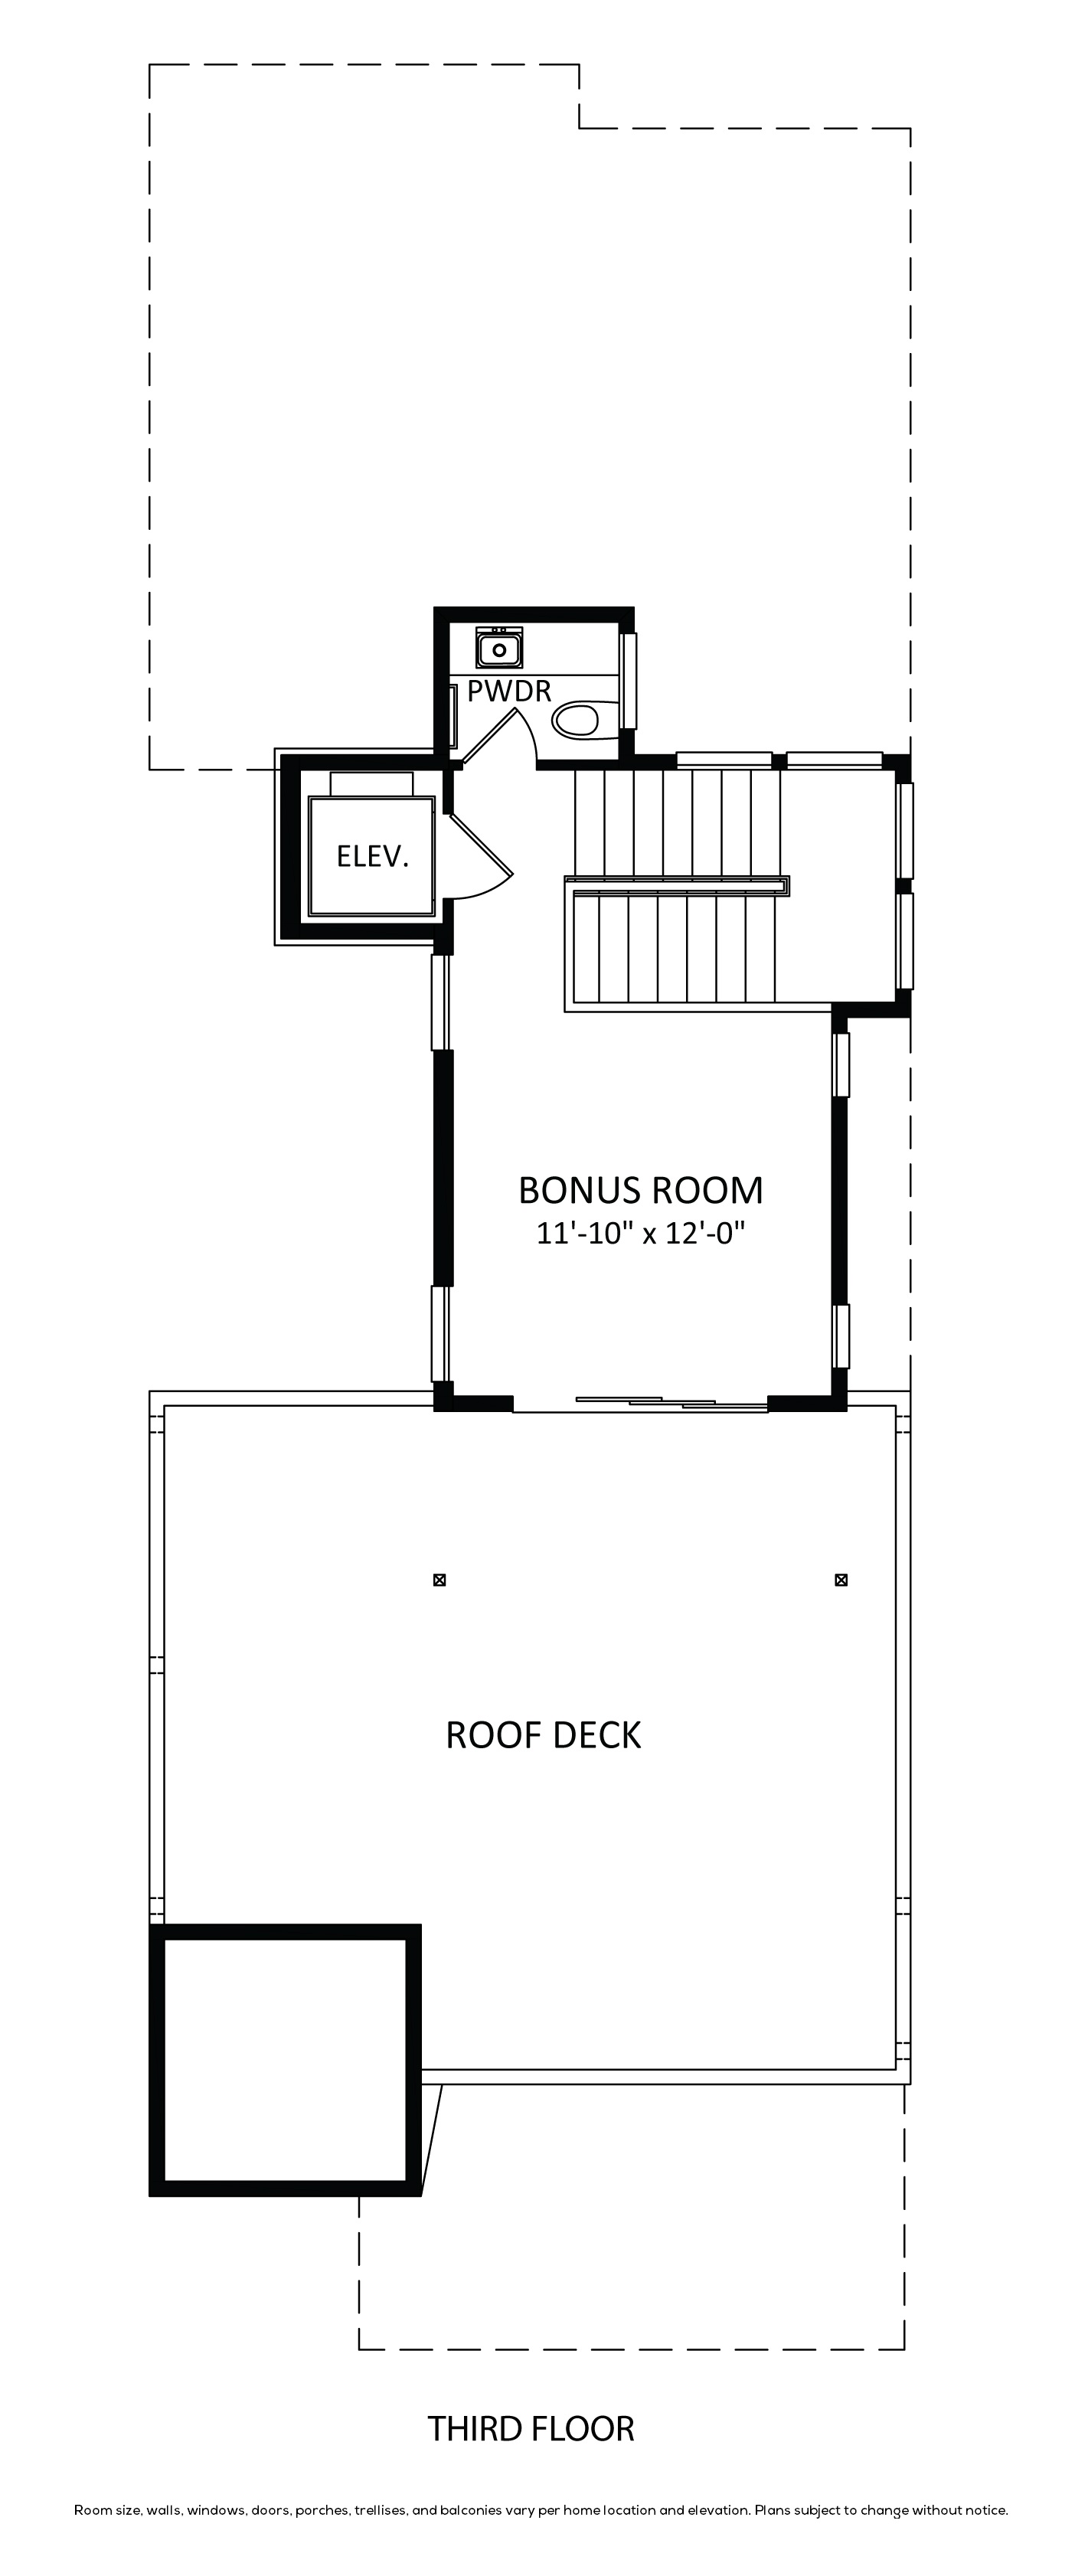 Floorplan 03. 225 Coral Ave.jpg for 225 Coral Avenue